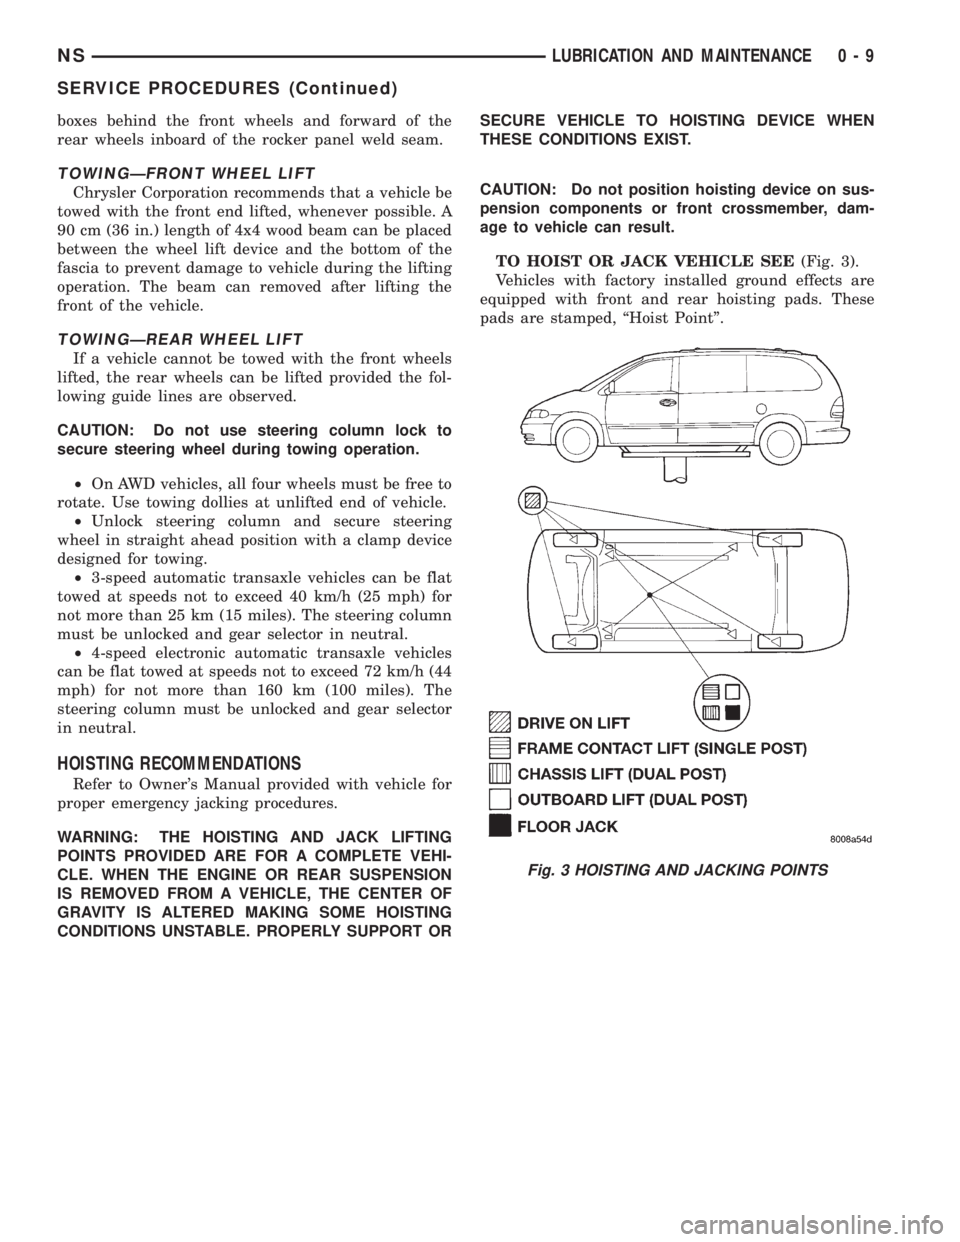 CHRYSLER VOYAGER 1996  Service Manual boxes behind the front wheels and forward of the
rear wheels inboard of the rocker panel weld seam.
TOWINGÐFRONT WHEEL LIFT
Chrysler Corporation recommends that a vehicle be
towed with the front end 